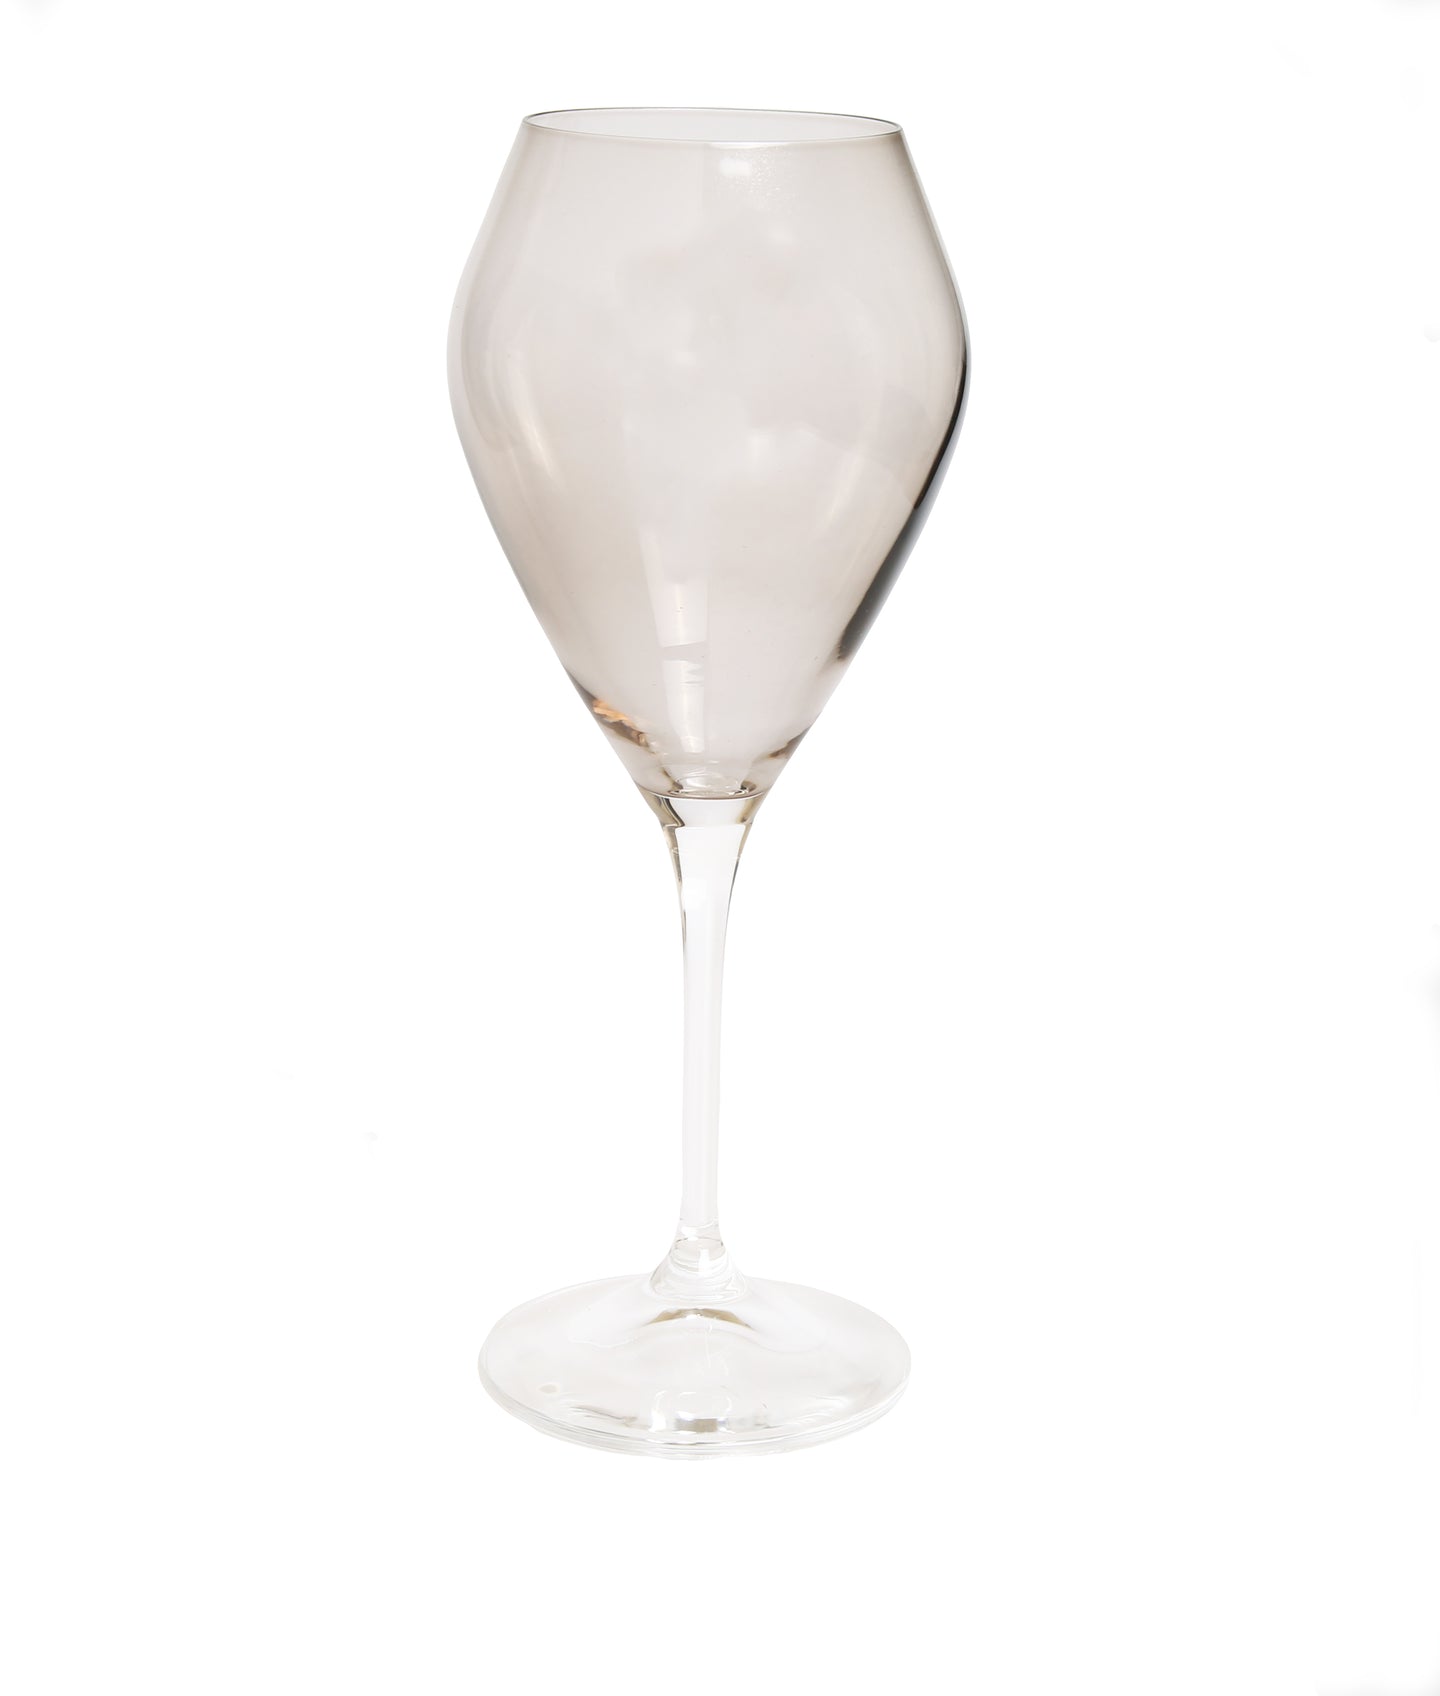 Set of 6 Smoked V-Shaped Water Glasses with Clear Stem